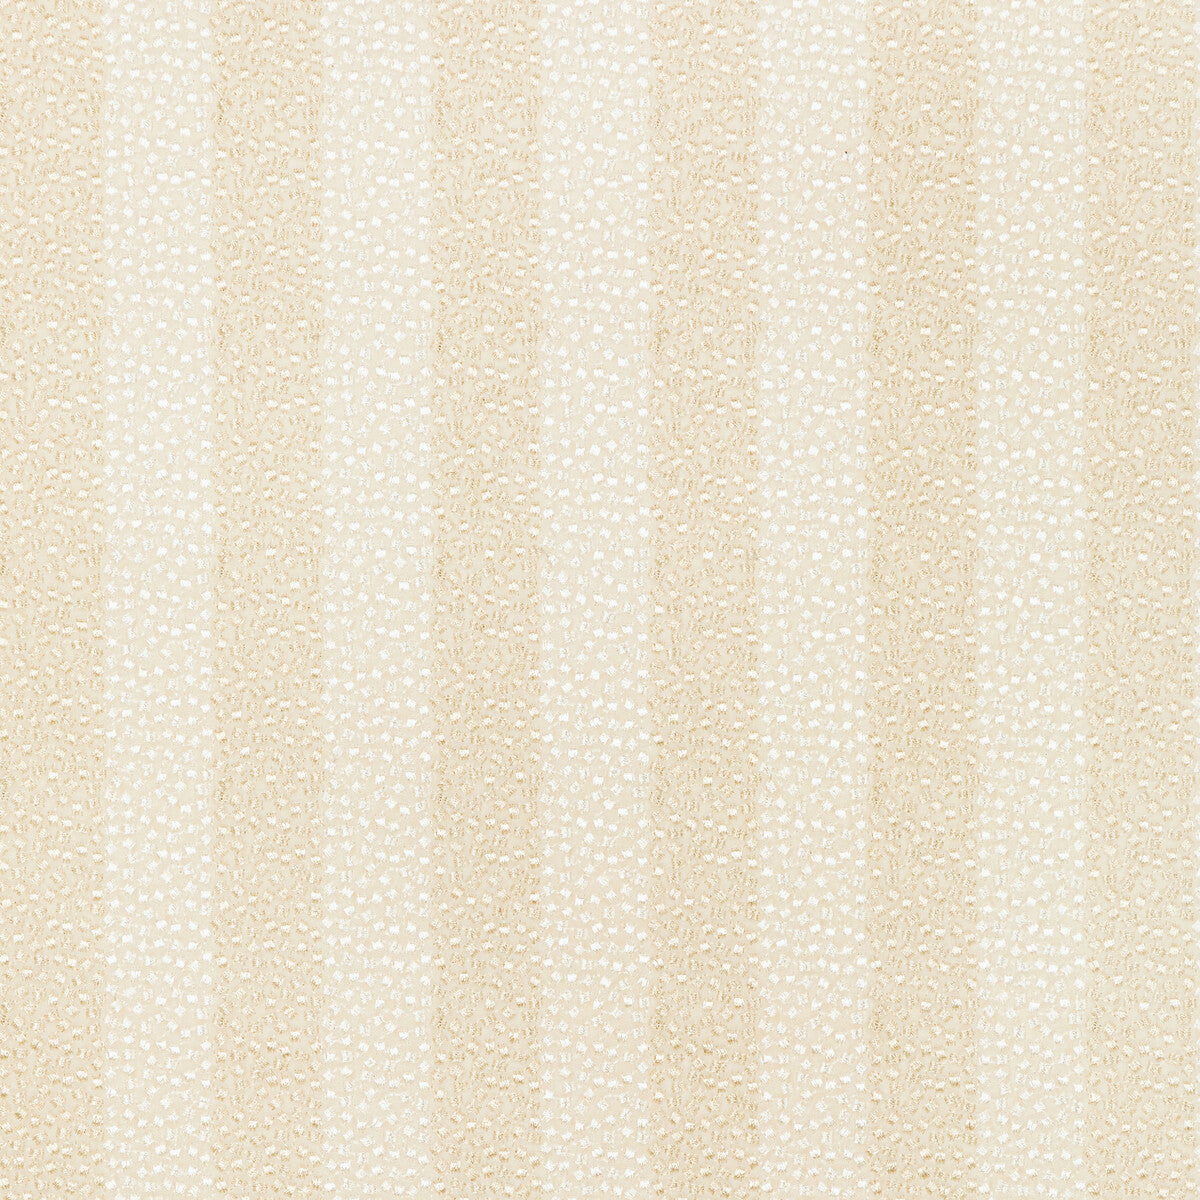 Proximity fabric in cream color - pattern 36341.1.0 - by Kravet Couture in the Modern Luxe III collection